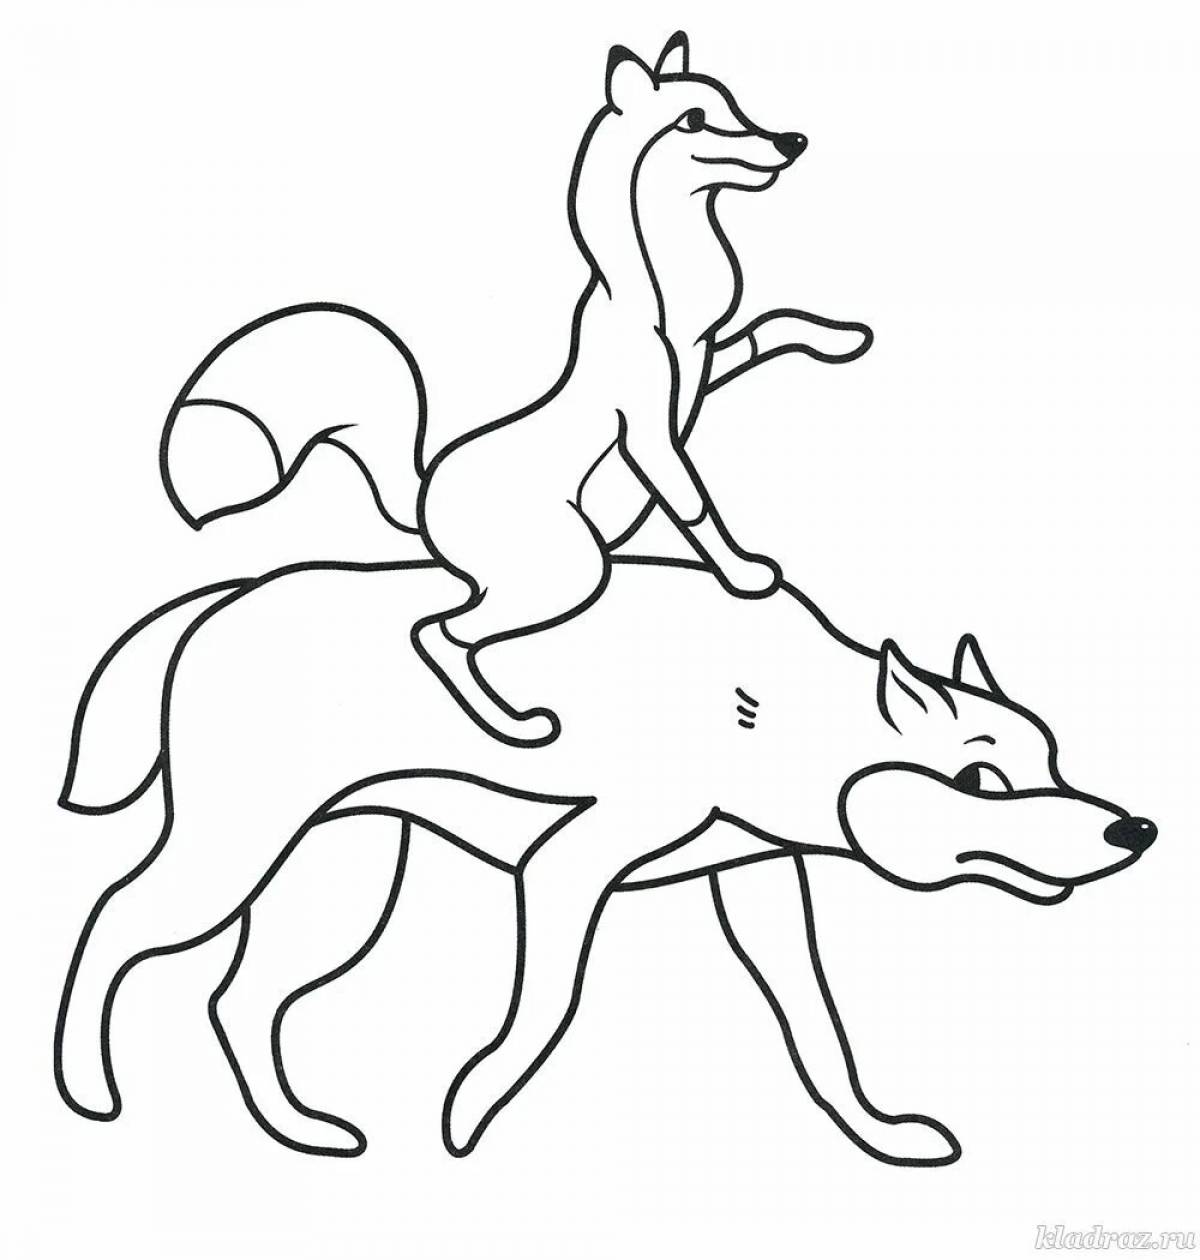 Playful fox and wolf coloring book for kids